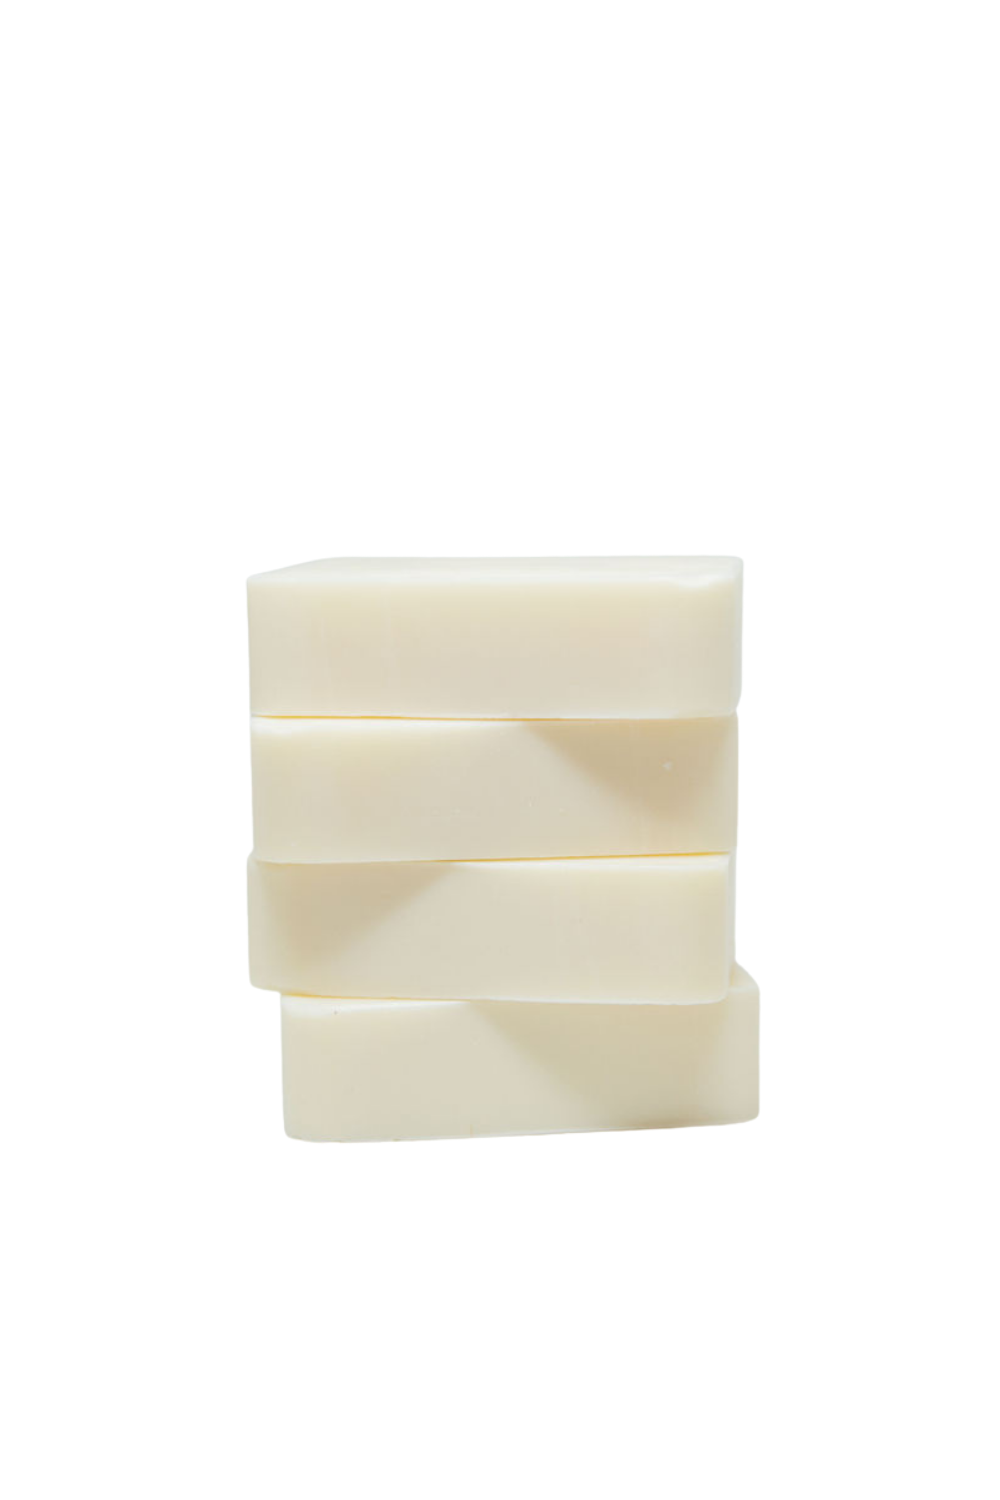 Best Natural Soap for Eczema - soap stacked